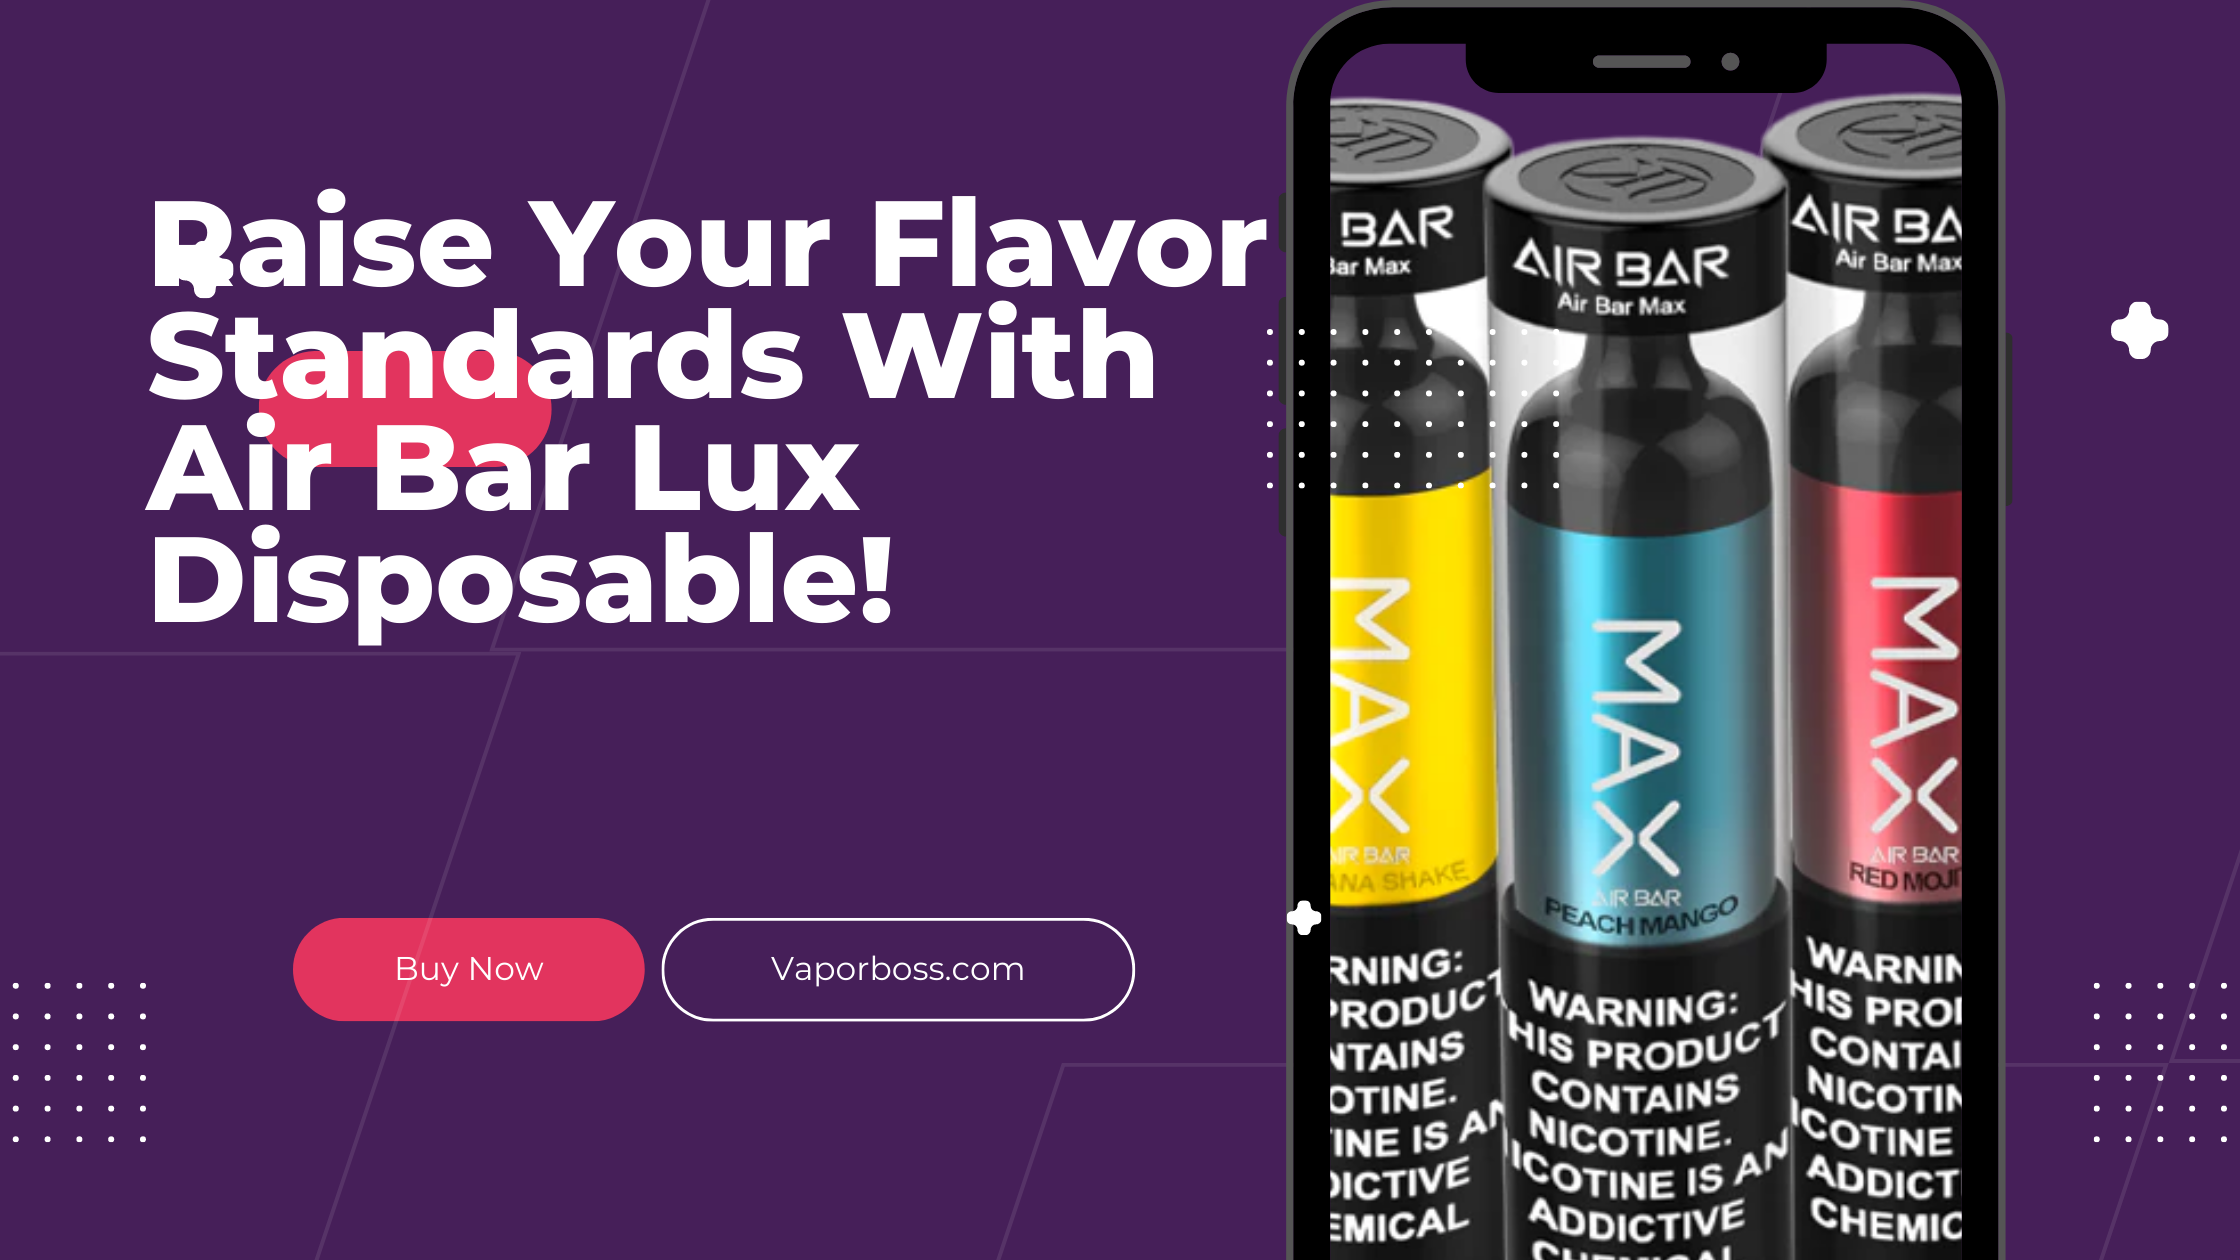 Raise Your Flavor Standards With Air Bar Lux Disposable!